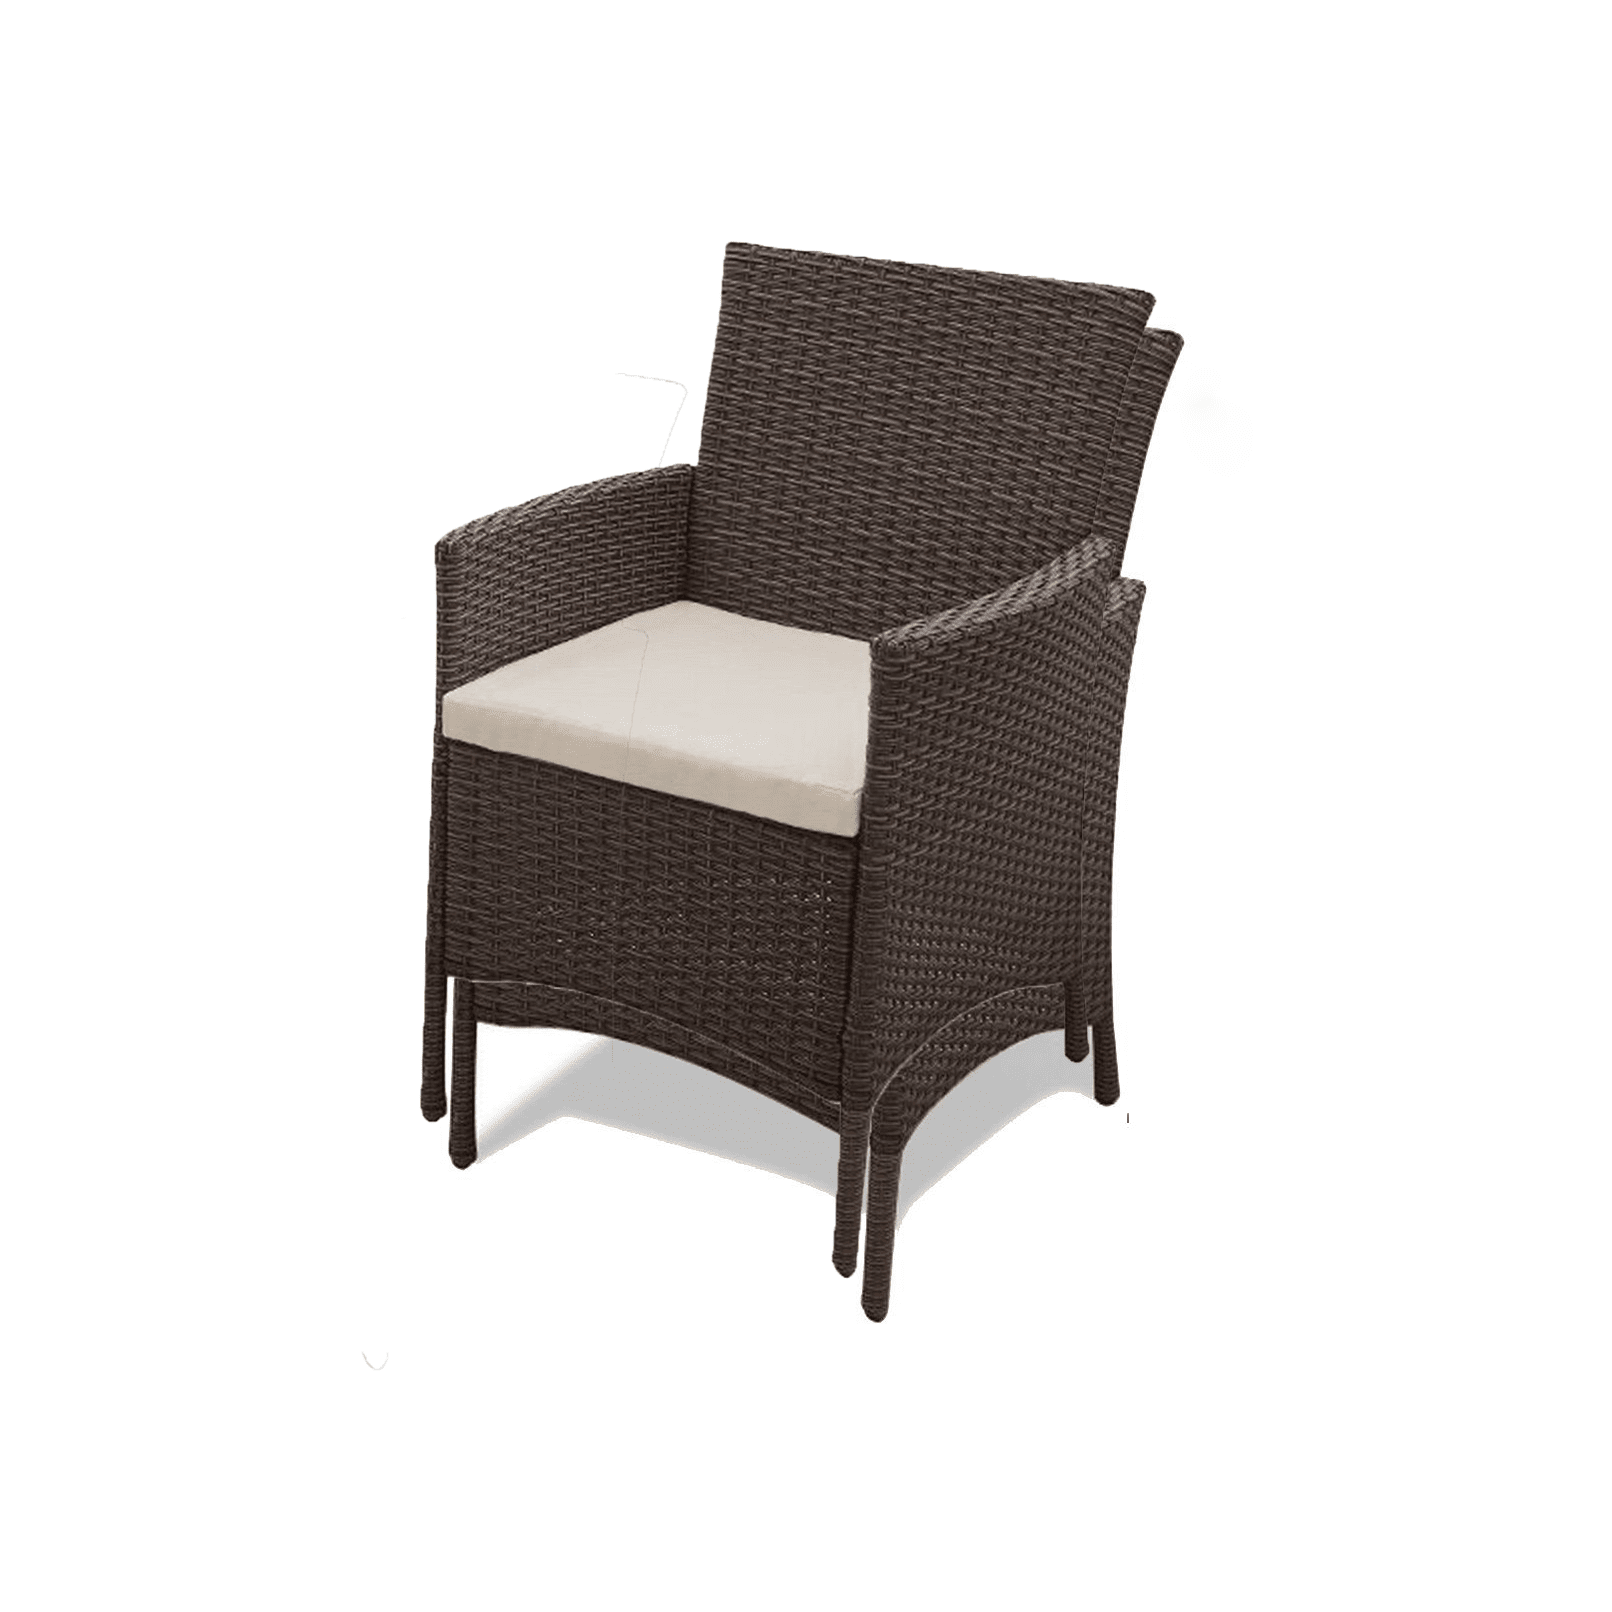 Outdoor Dining Chairs - Set Of 2 - Brown Rattan